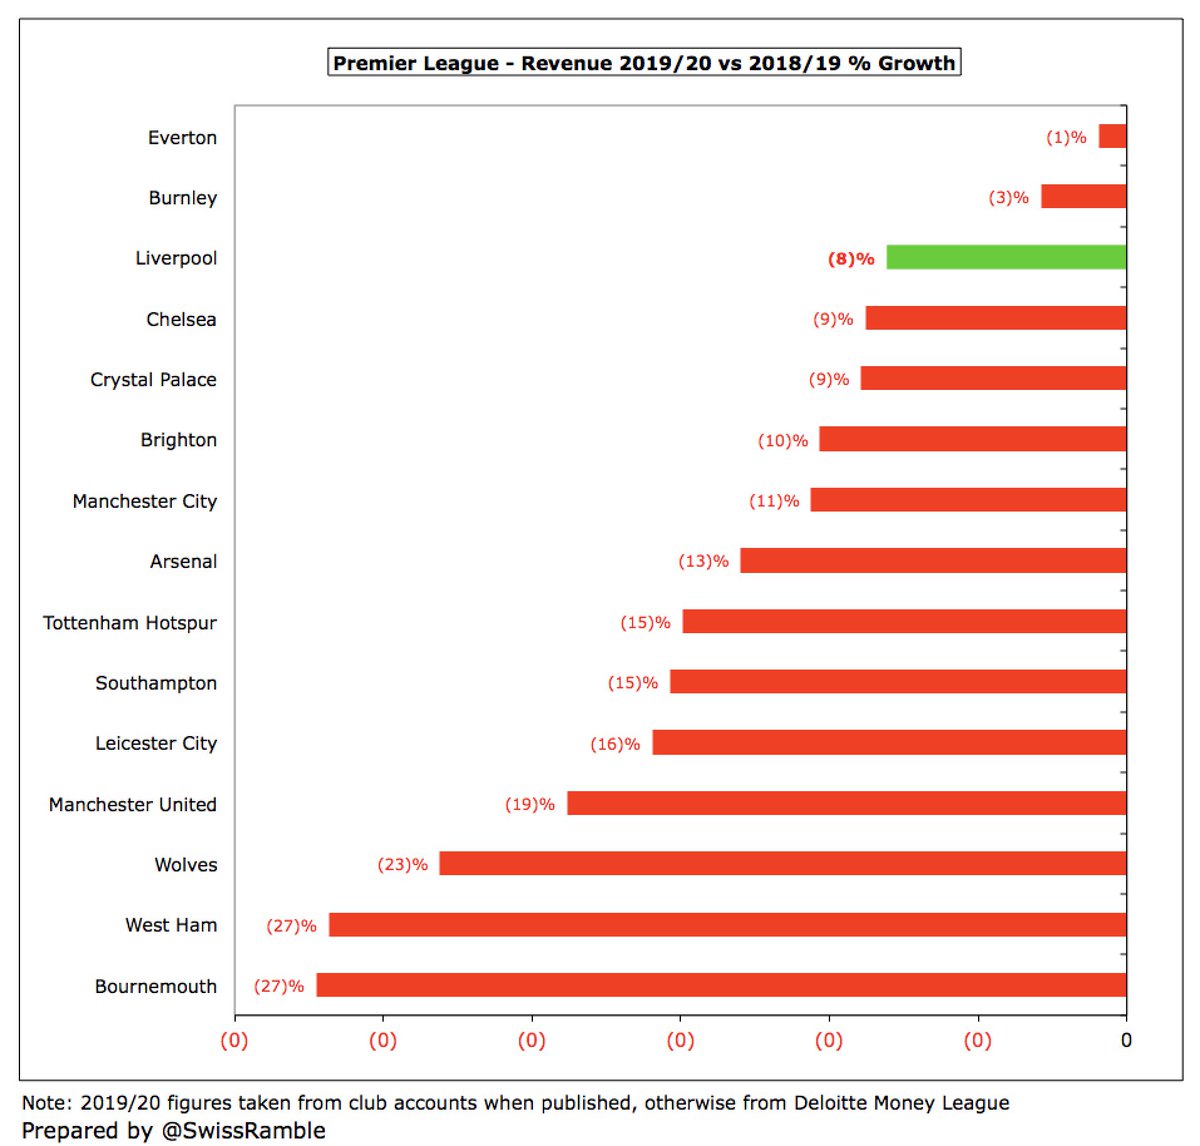 Nevertheless,  #LFC 8% revenue decrease is one of the better performances in 2019/20 with the average being 13%, though the fall in absolute terms (£43m) is towards the higher end. Note:  #EFC small 1% decrease is due to once-off £30m for stadium naming rights option.